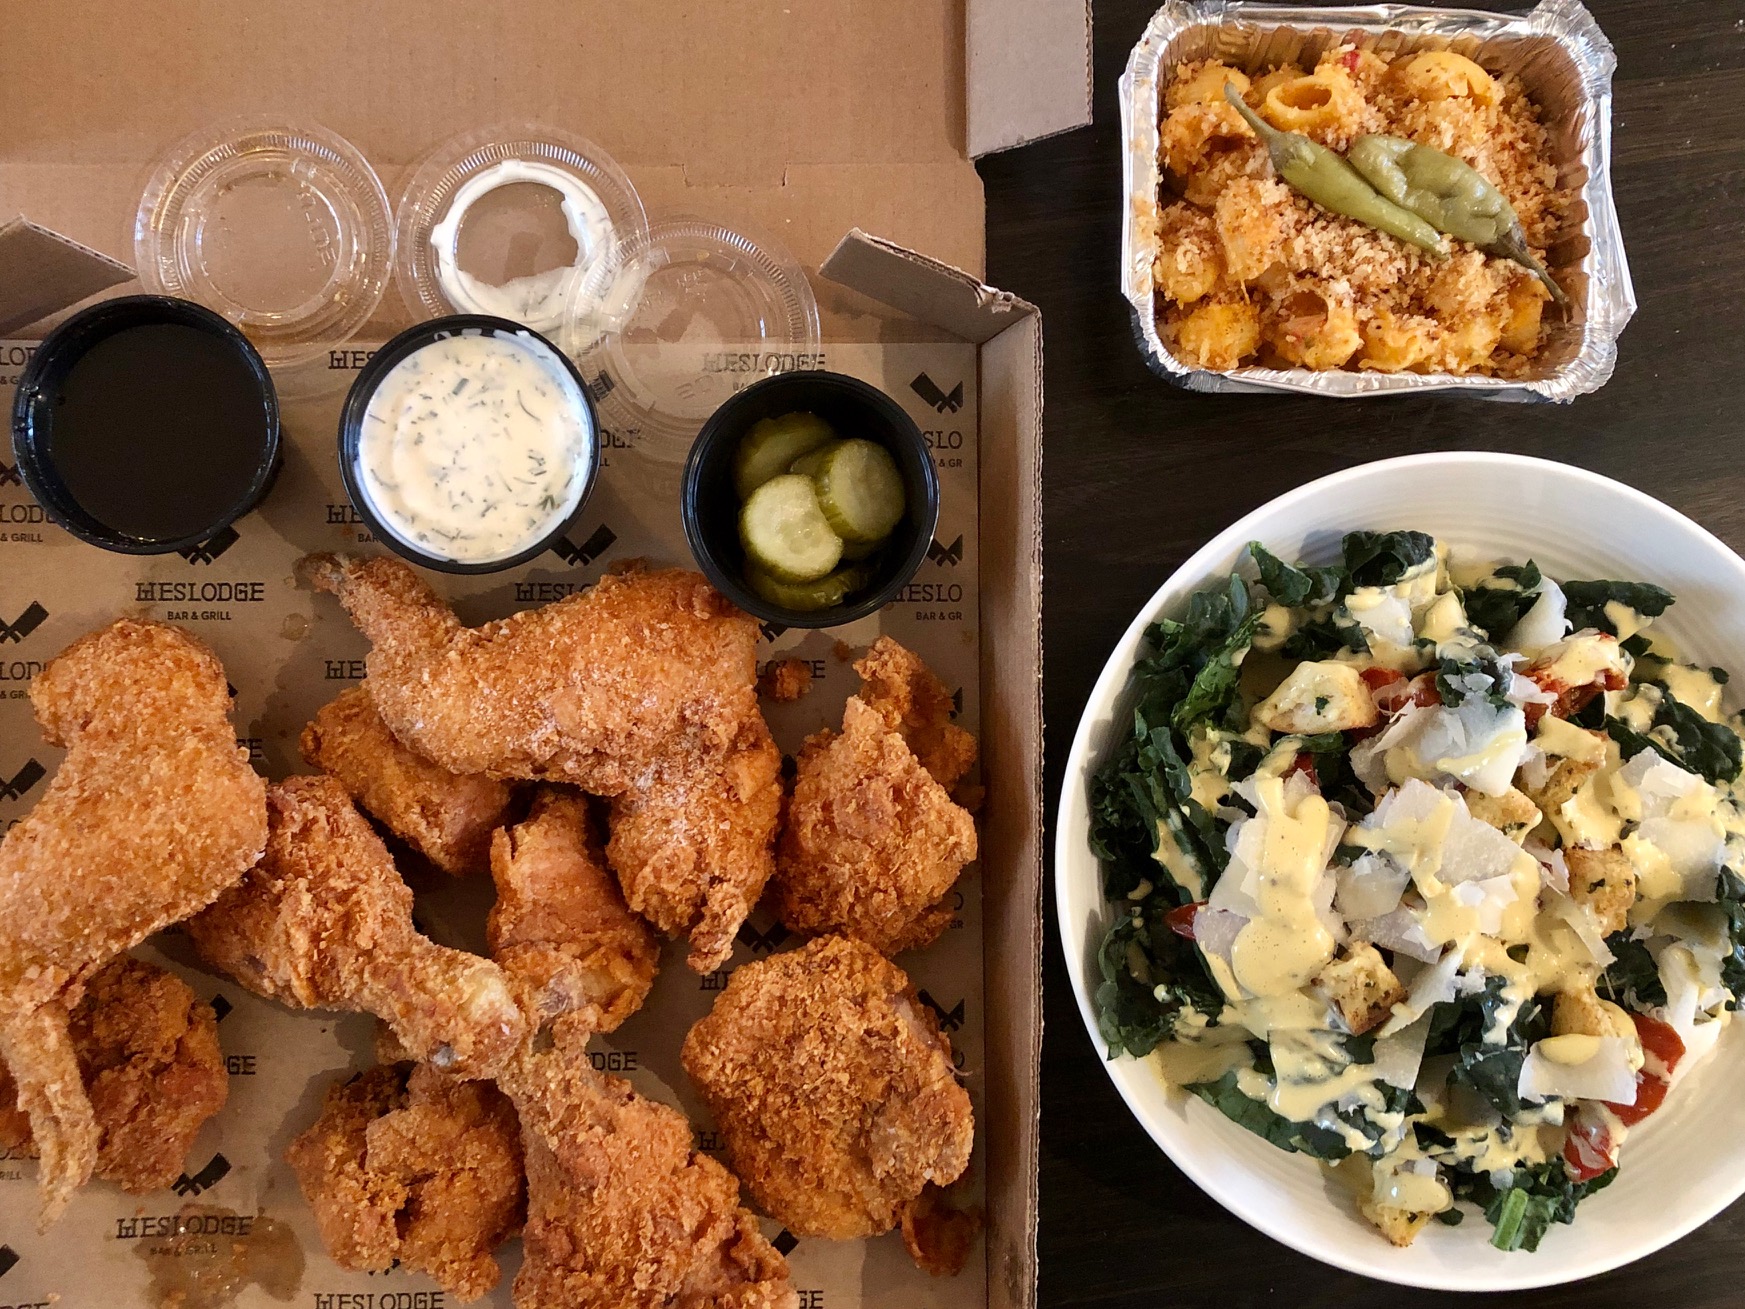 Madame Marie’s Weekly Roundup: Toronto’s Best Takeout and Delivery During COVID-19 – April 30, 2020